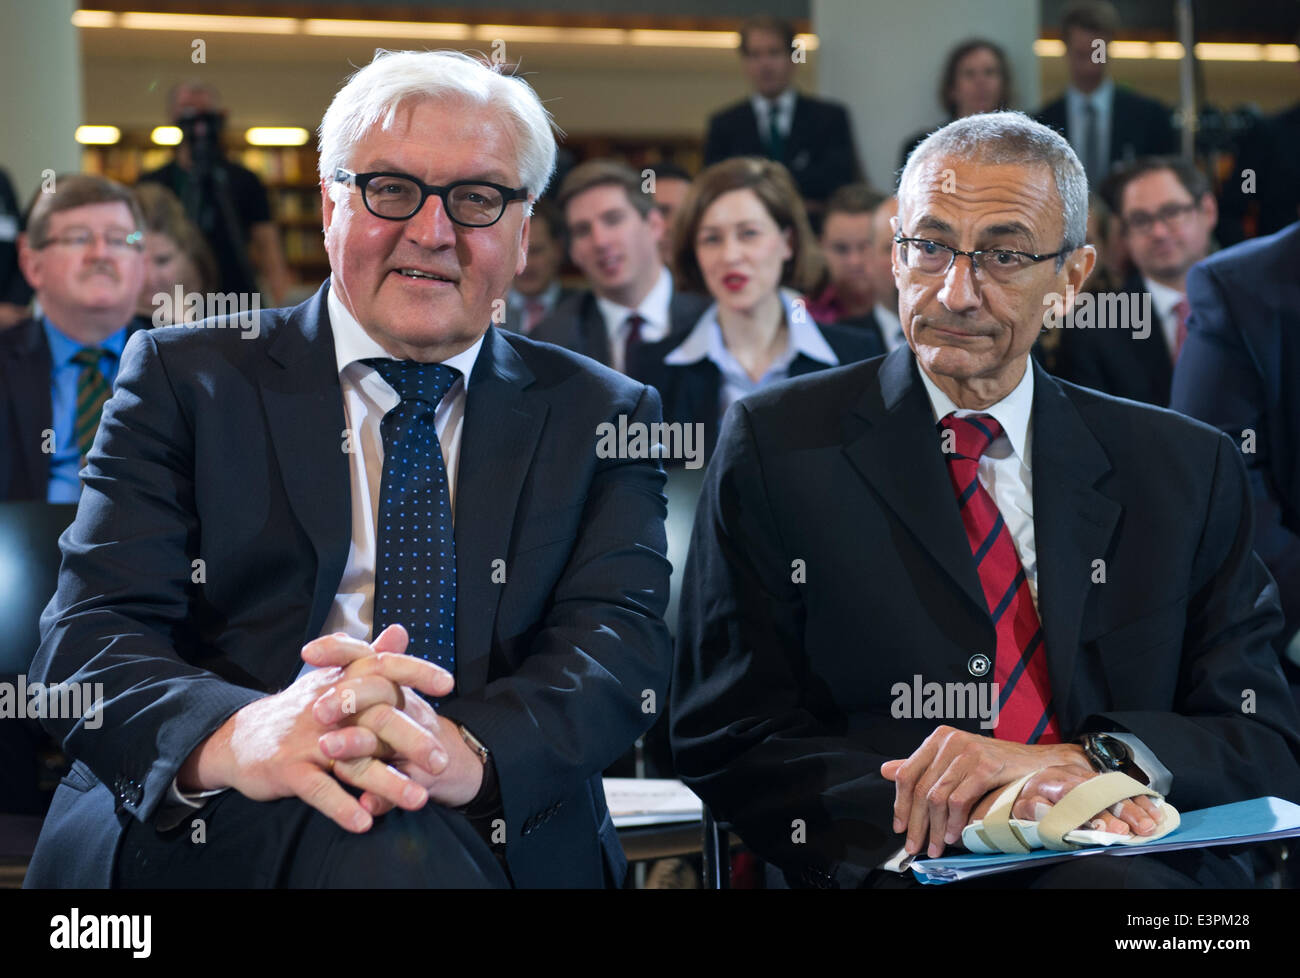 Berlin, Germany. 27th June, 2014. German Foreign Minister Frank-Walter Steinmeier (L) and former US Chief of Staff John Podesta sit at the 'Transatlantic Cyber Dialogue' at the Foreign Office in Berlin, Germany, 27 June 2014. The Cyber Dialogue is meant to help clear up the anxiety between Germany and the USA because of the NSA affair. Photo: BERND VON JUTRCZENKA/dpa/Alamy Live News Stock Photo